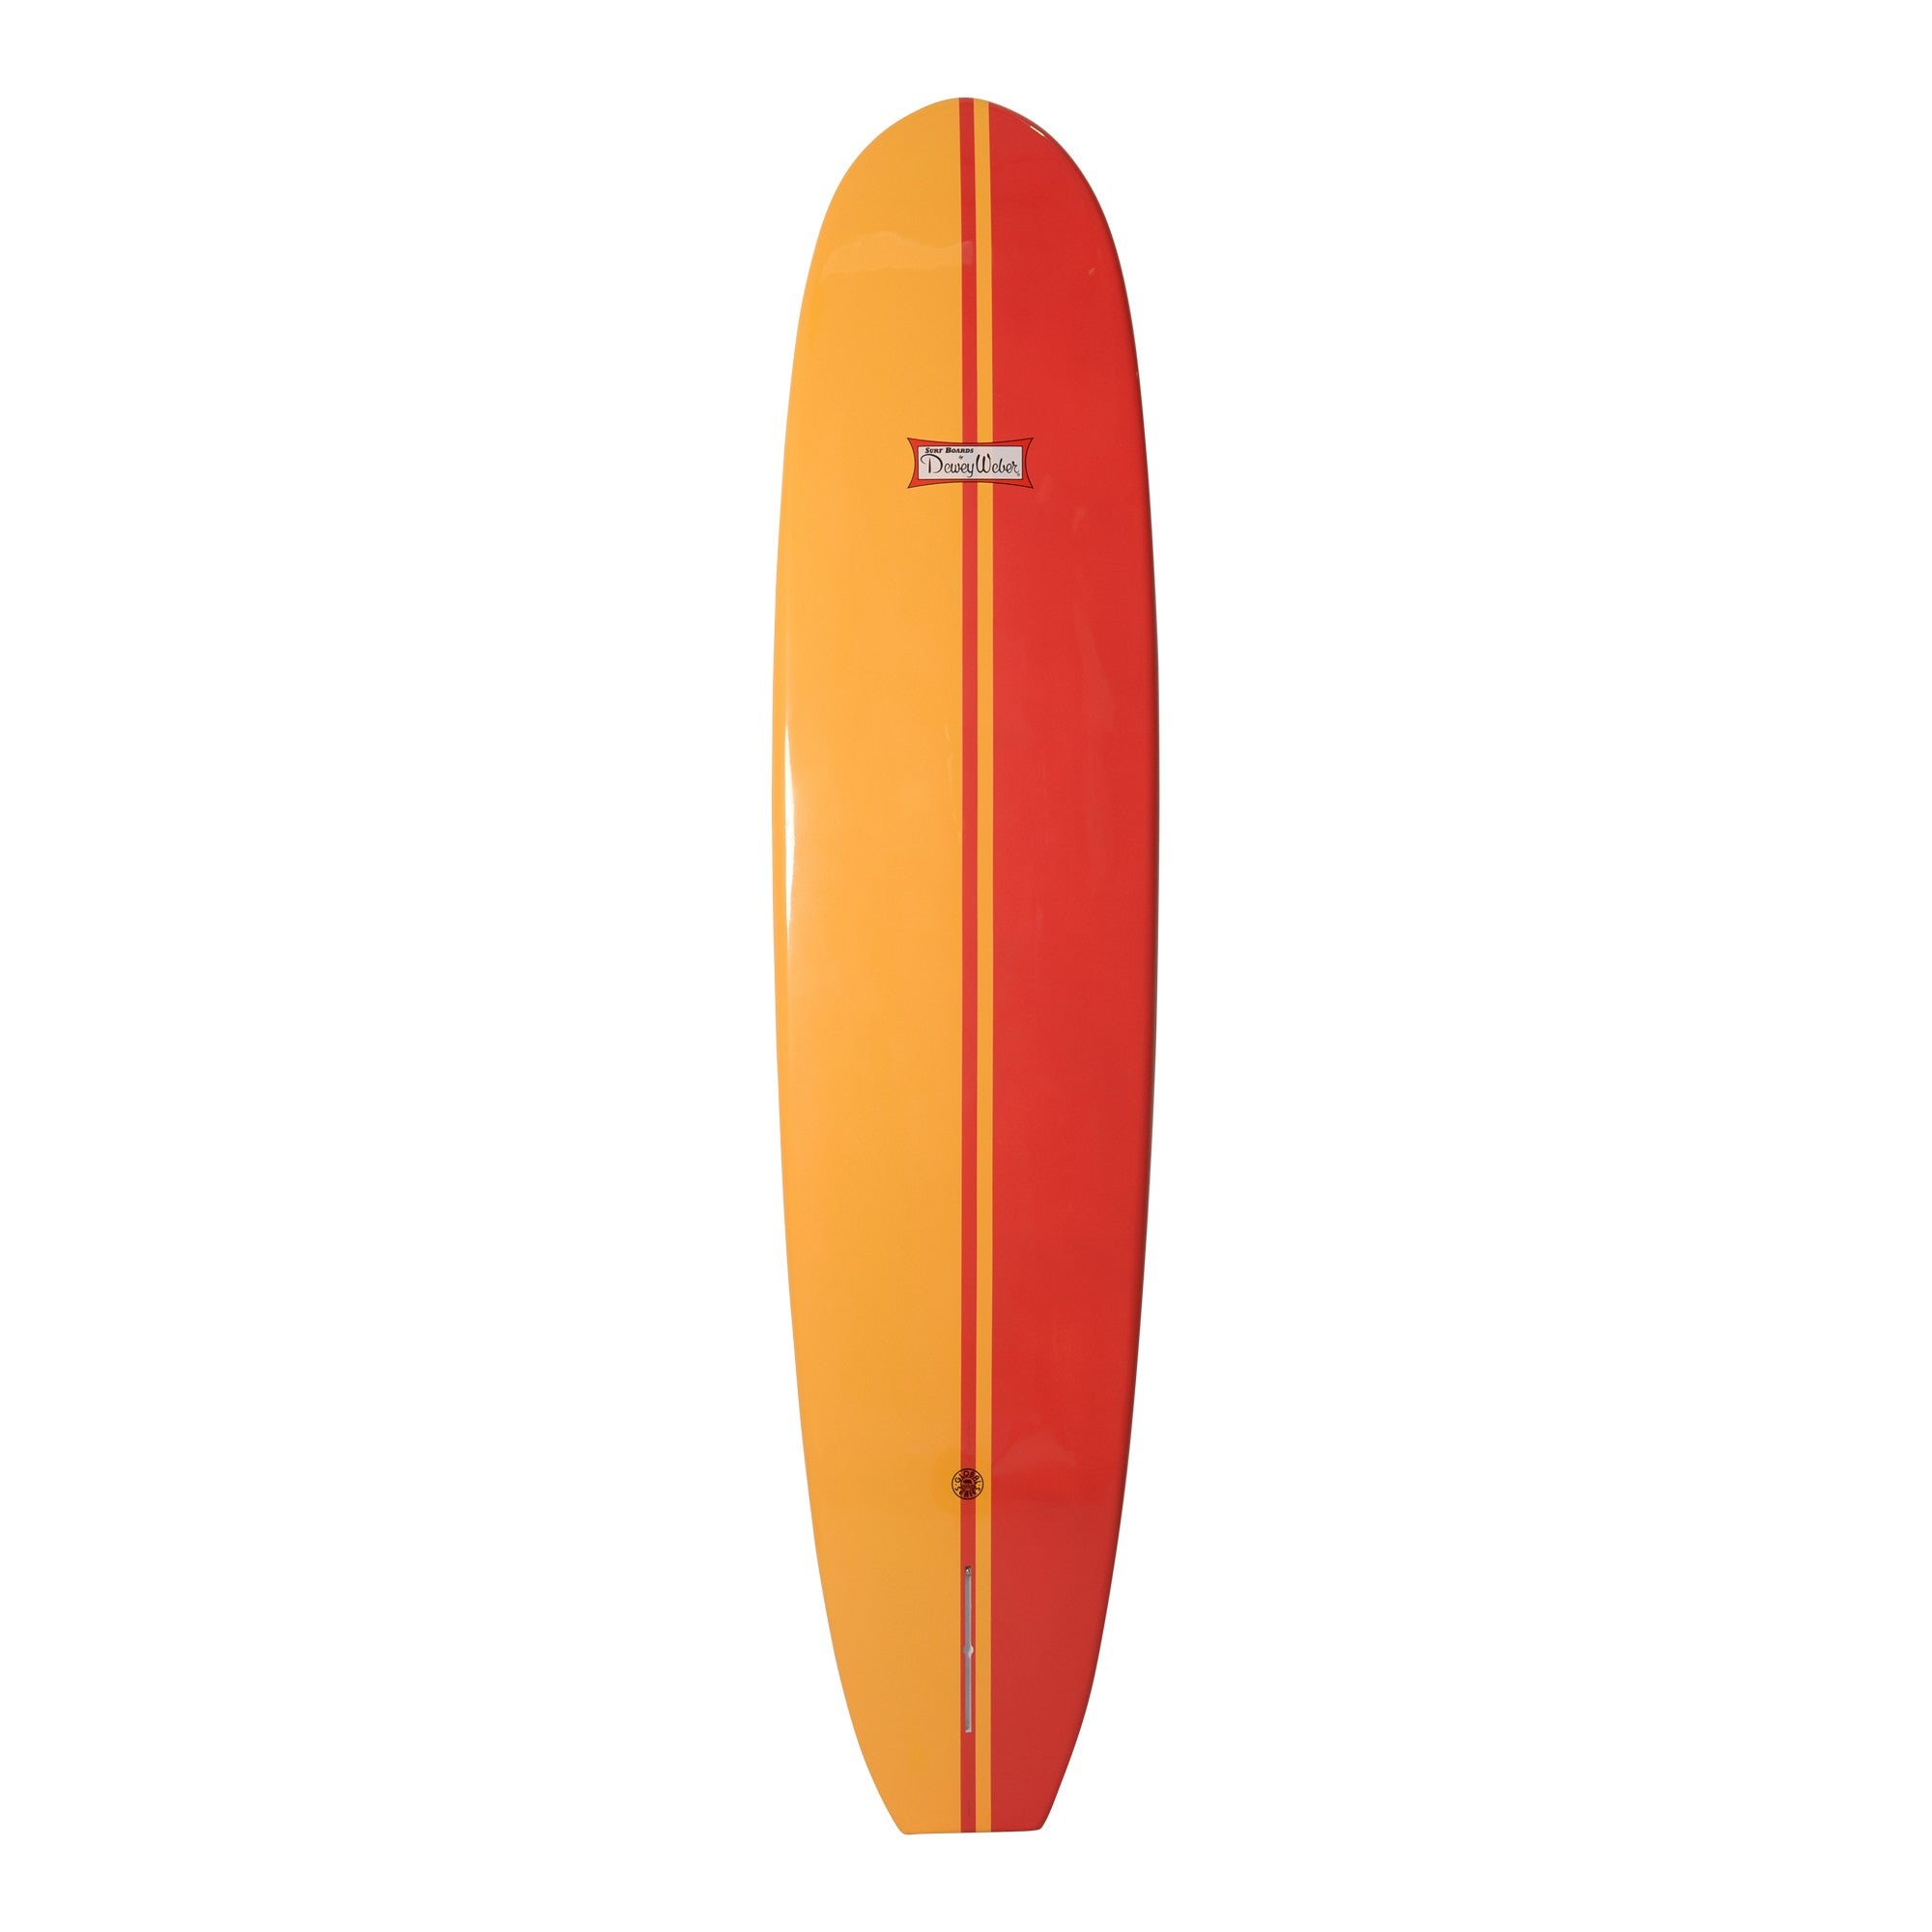 WEBER SURFBOARDS - Performer 9'4 - Red / Yellow